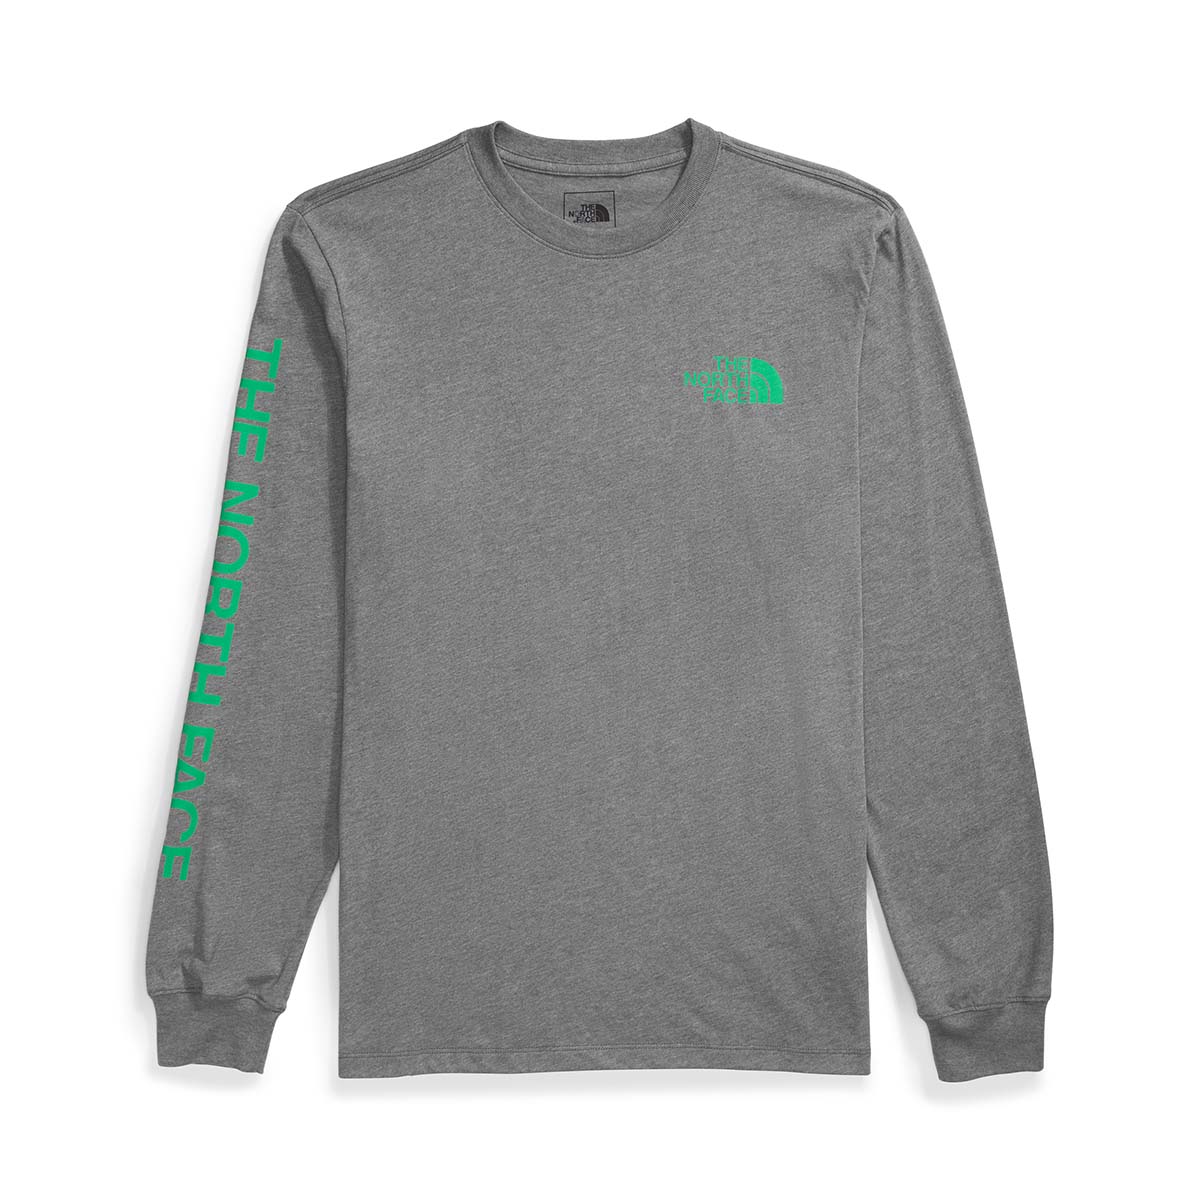 The North Face L/S Sleeve Hit Graphic Tee